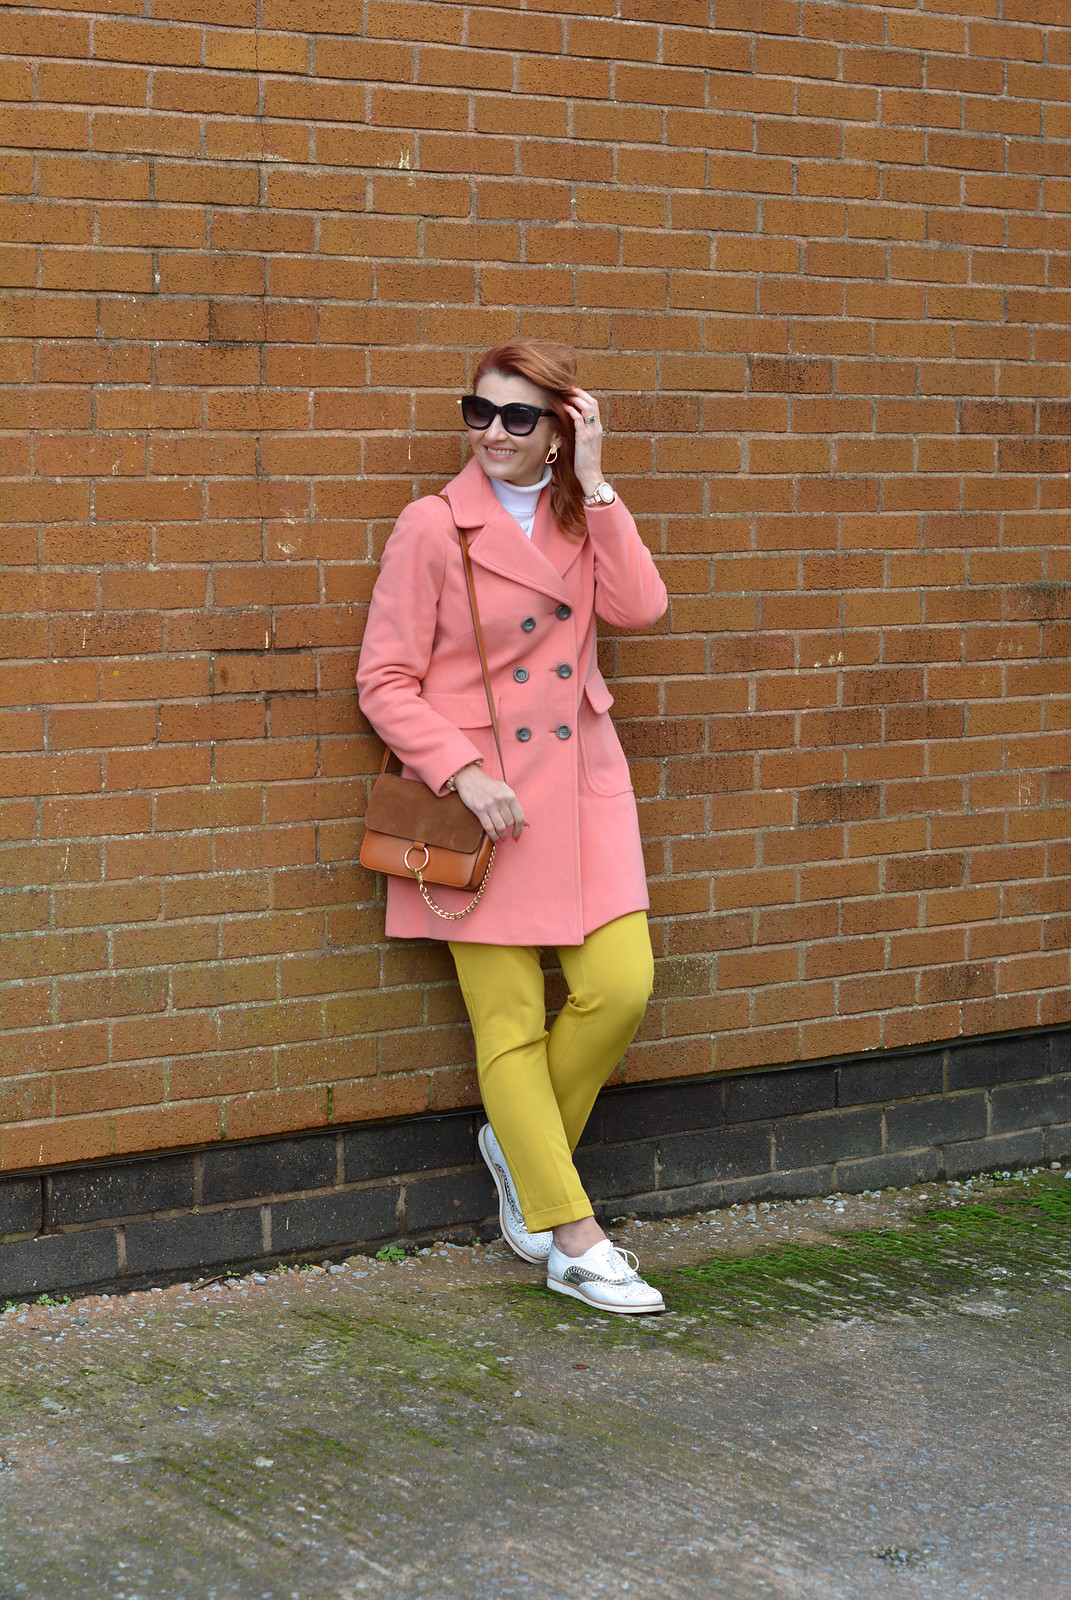 Winter style: Peach coat with mustard yellow and white | Not Dressed As Lamb